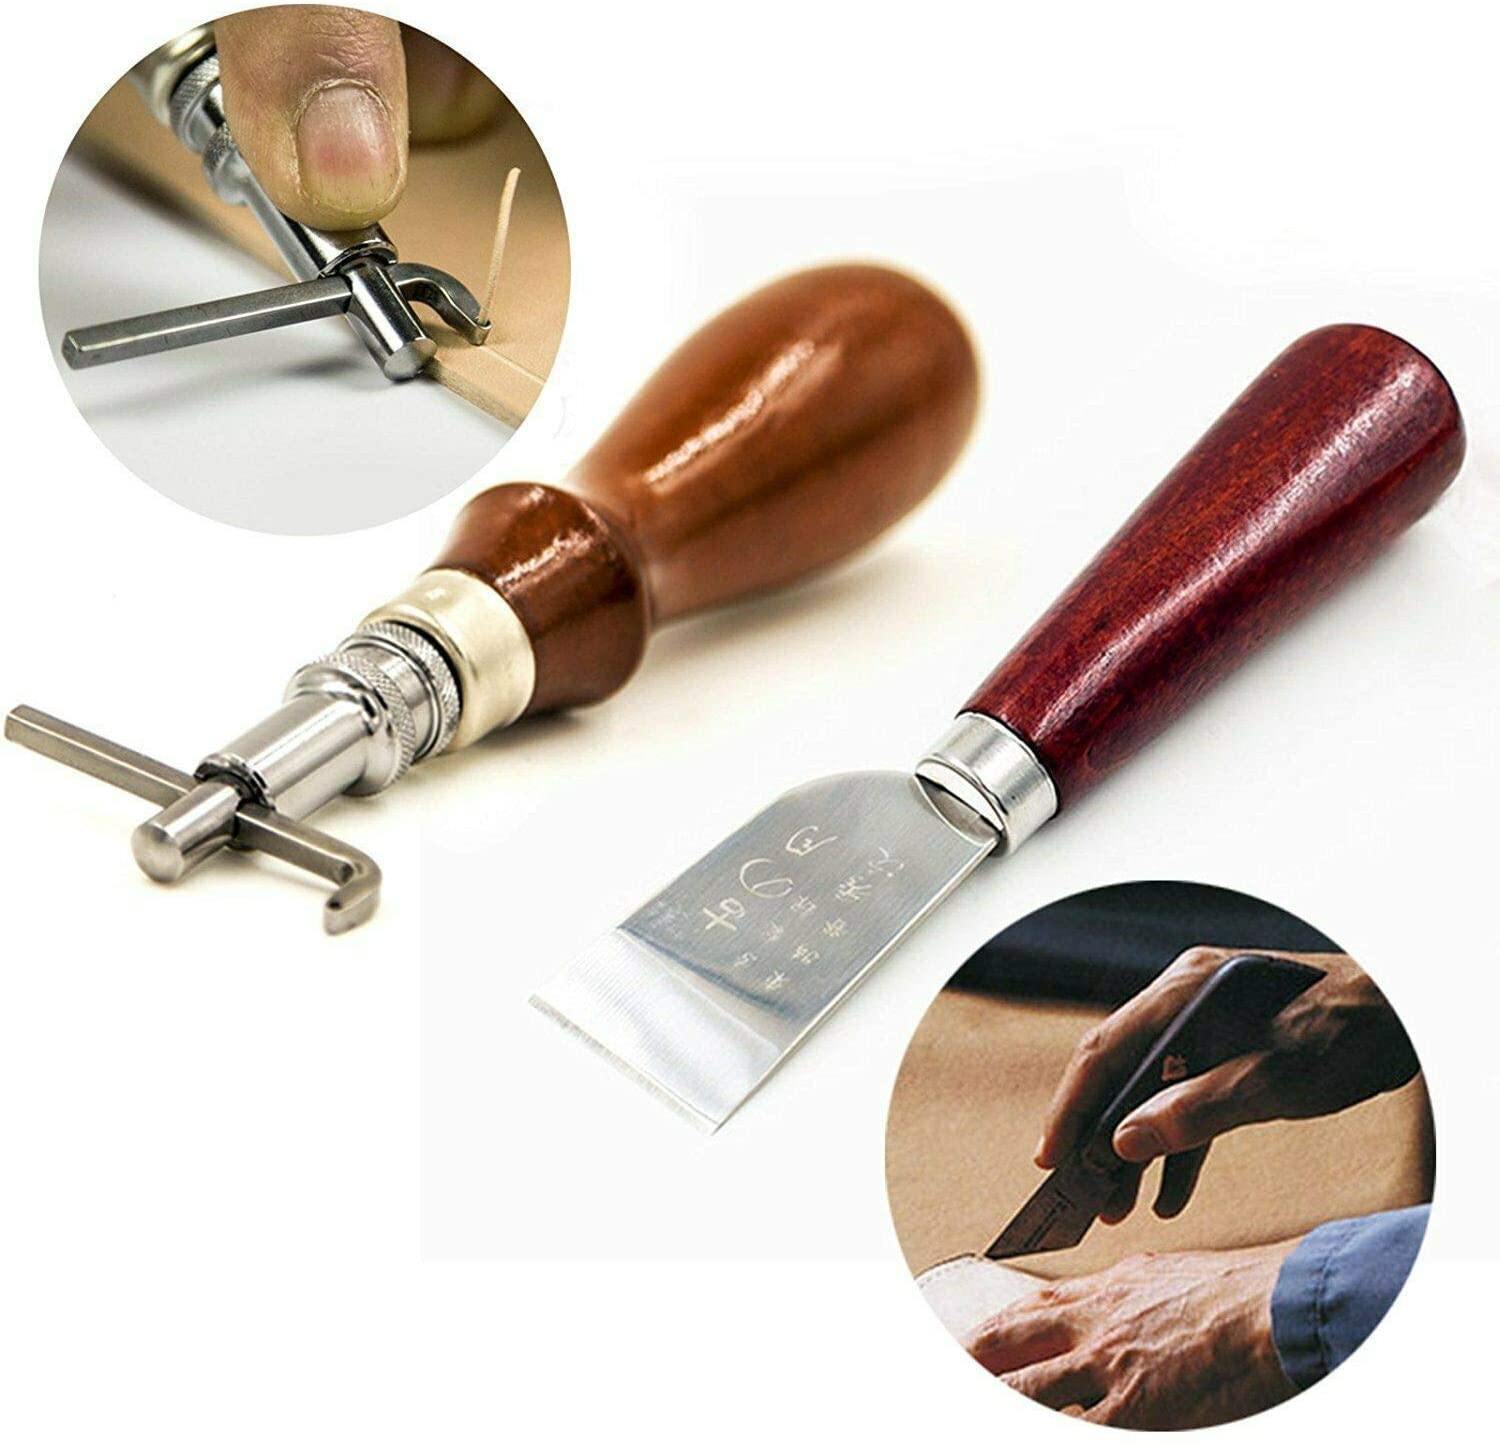 Swivel Knife,Knoweasy Stainless Steel Leather Cutting Tool with Adjustable  Handy Level 3.15-3.74 for Art Crafts DIY